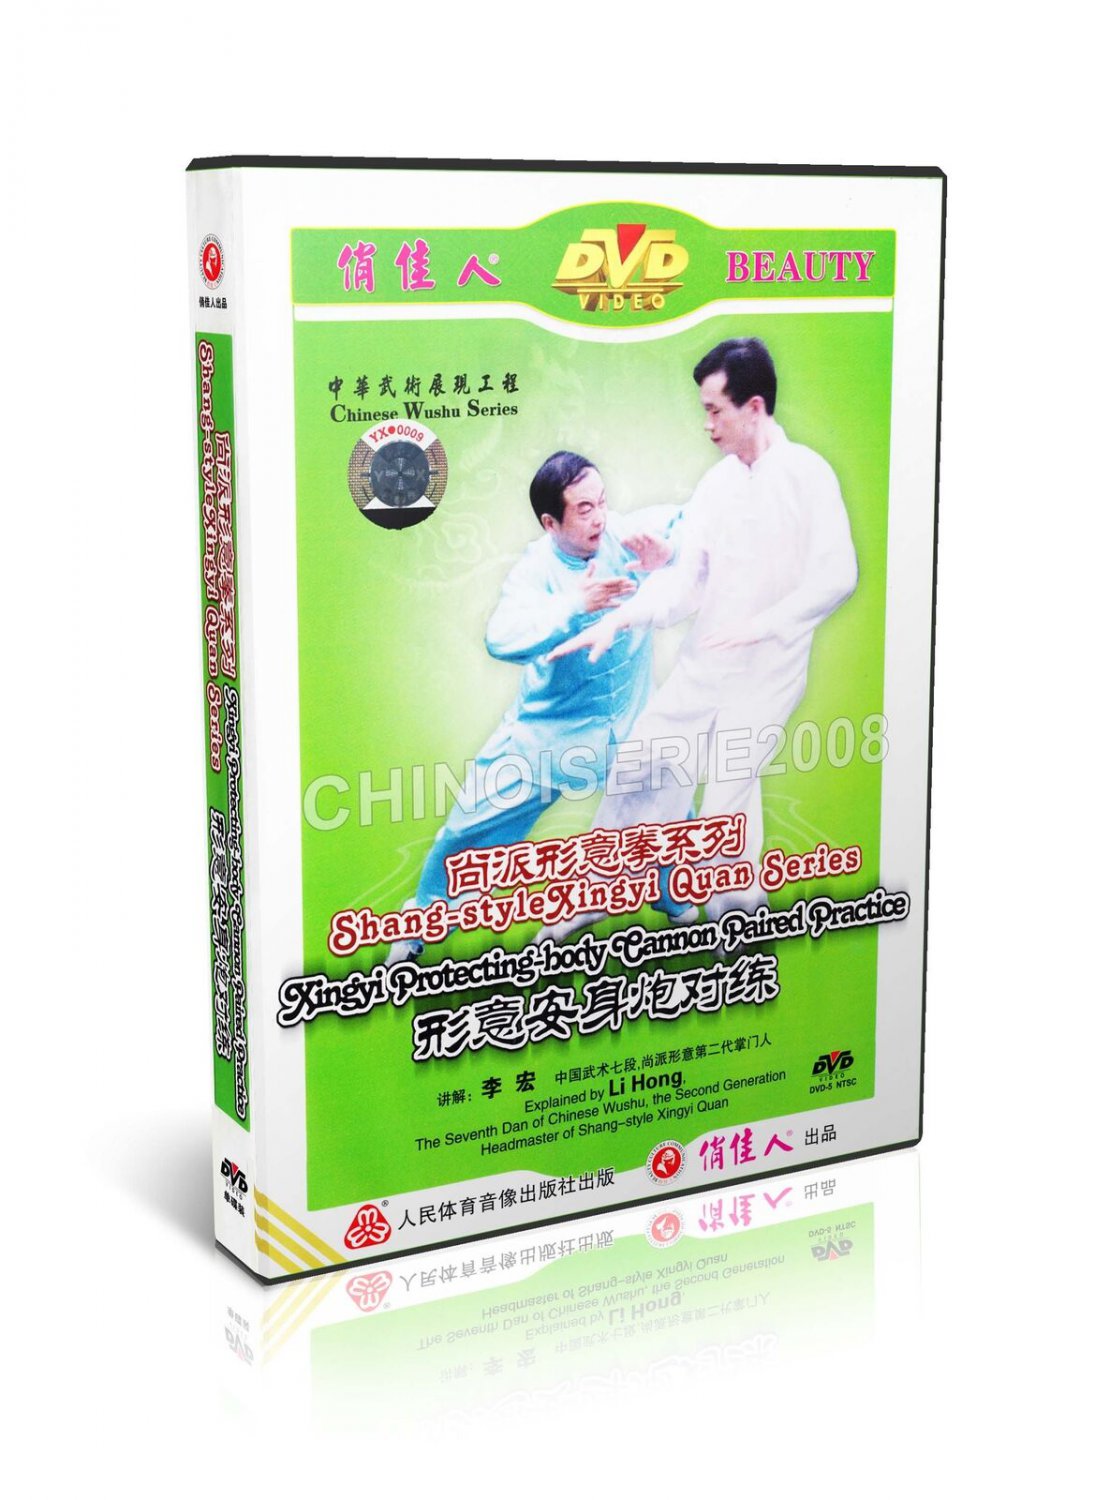 Shang Style Xingyi Quan - Xingyi Protecting Body Cannon Paired Practice DVD